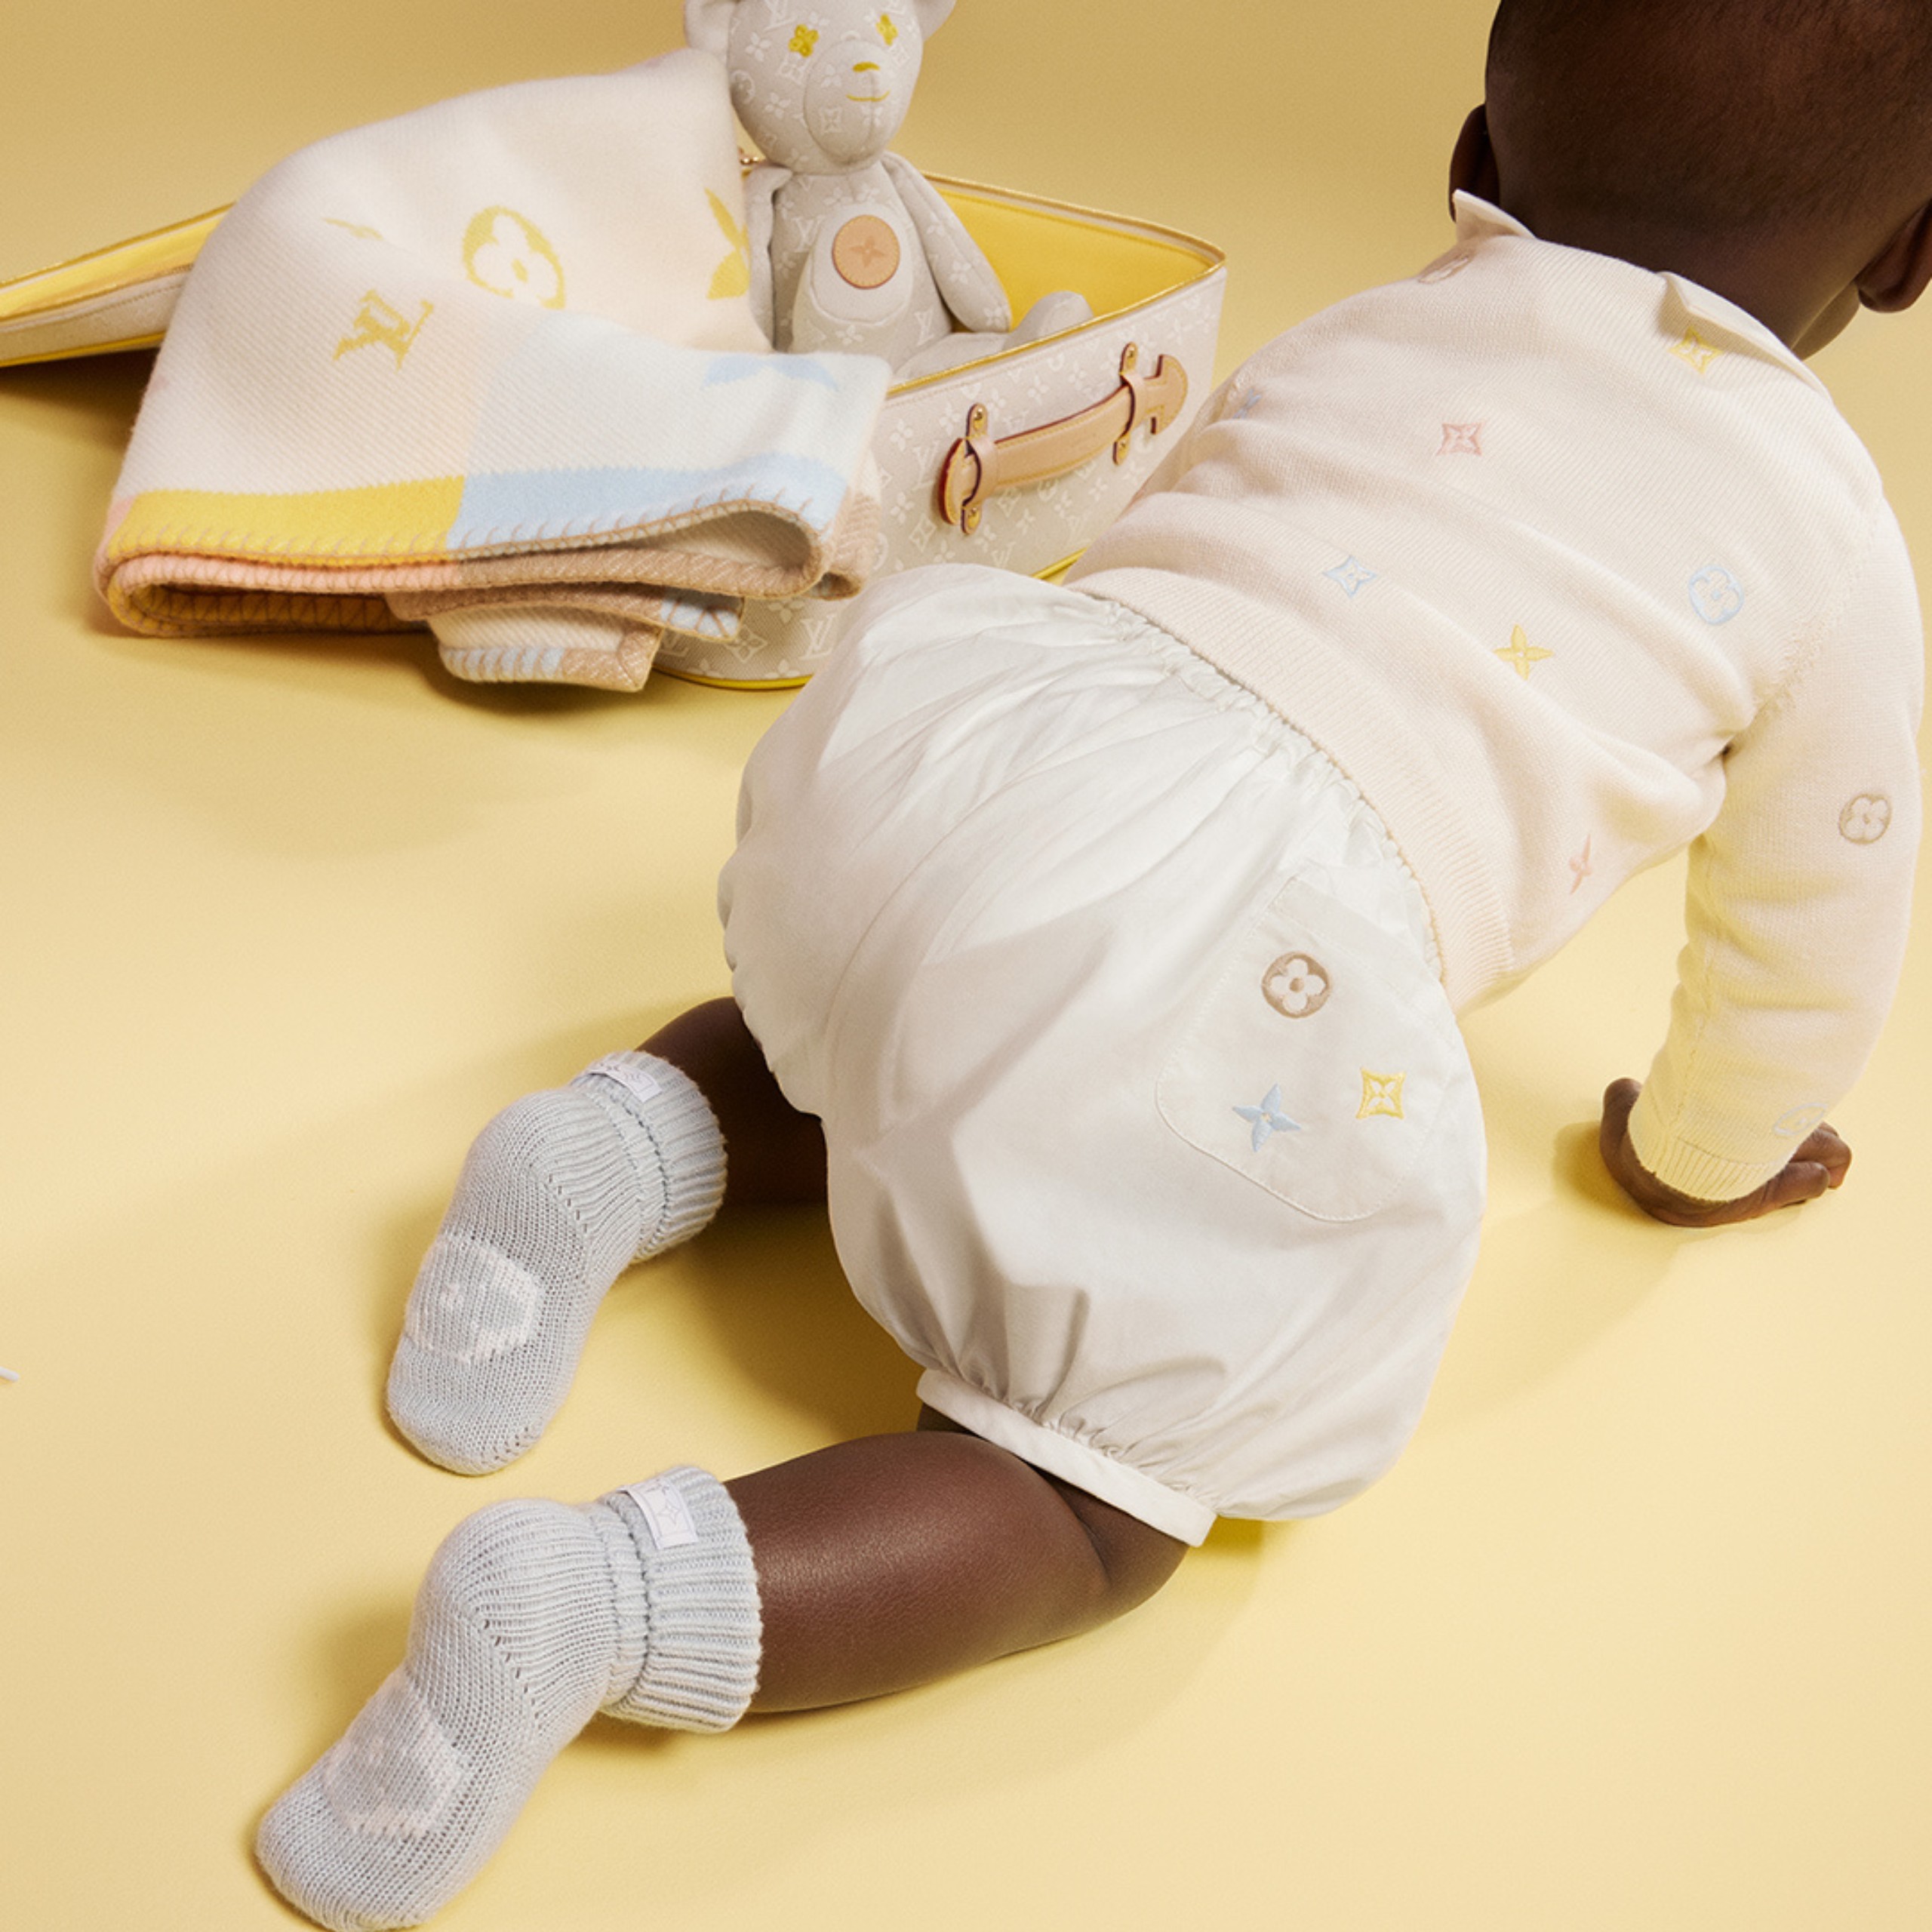 Louis Vuitton Introduces Its First Baby Collection